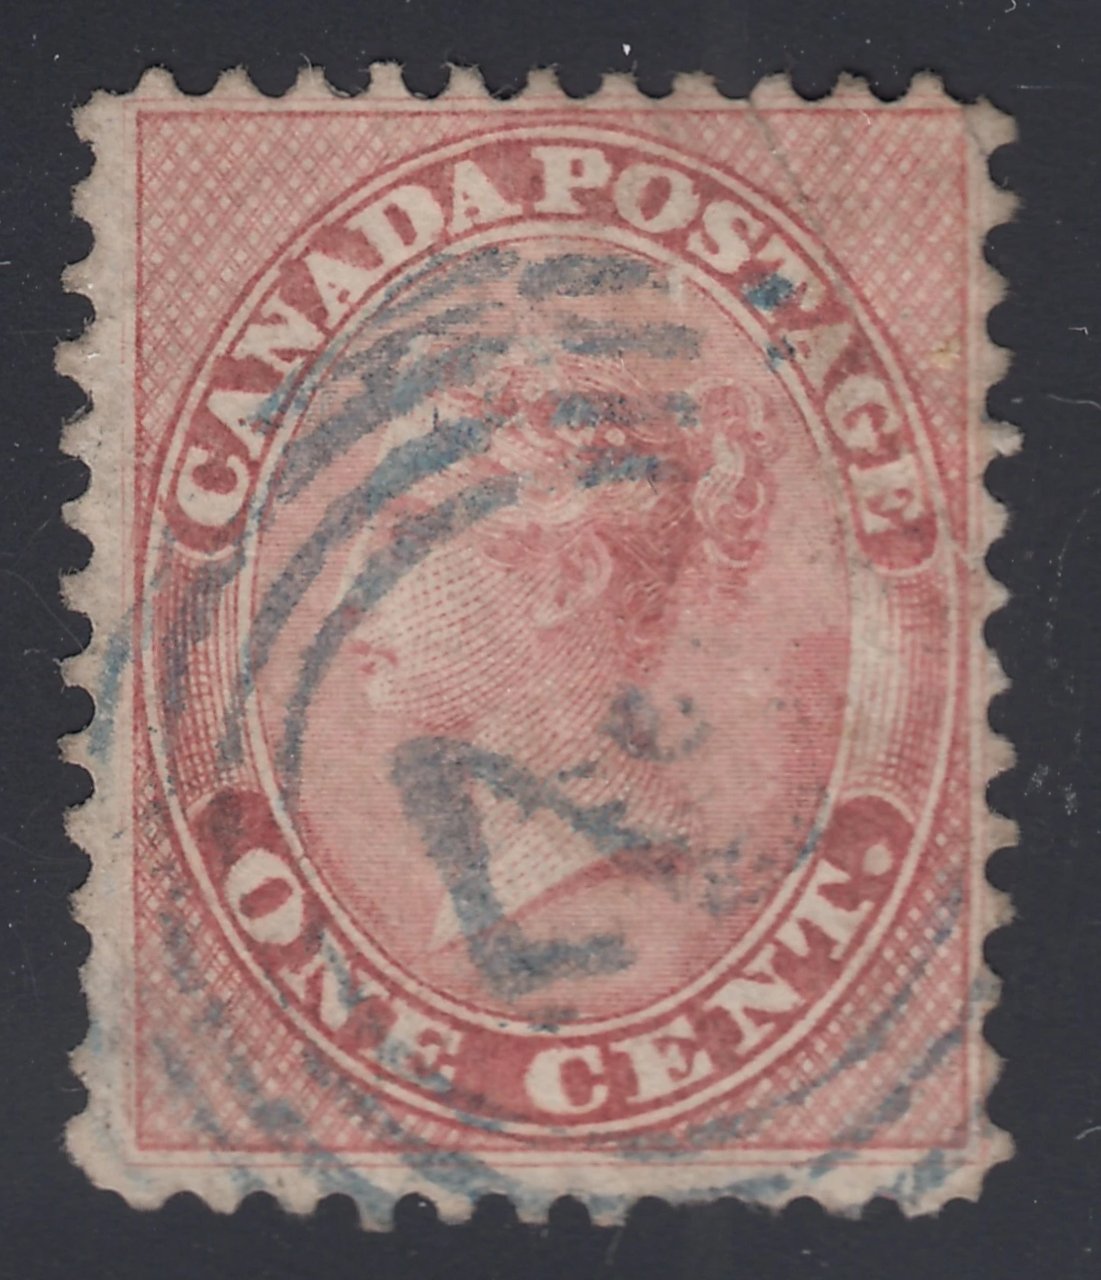 0014CA2112 - Canada #14x - Used, Major Re-Entry